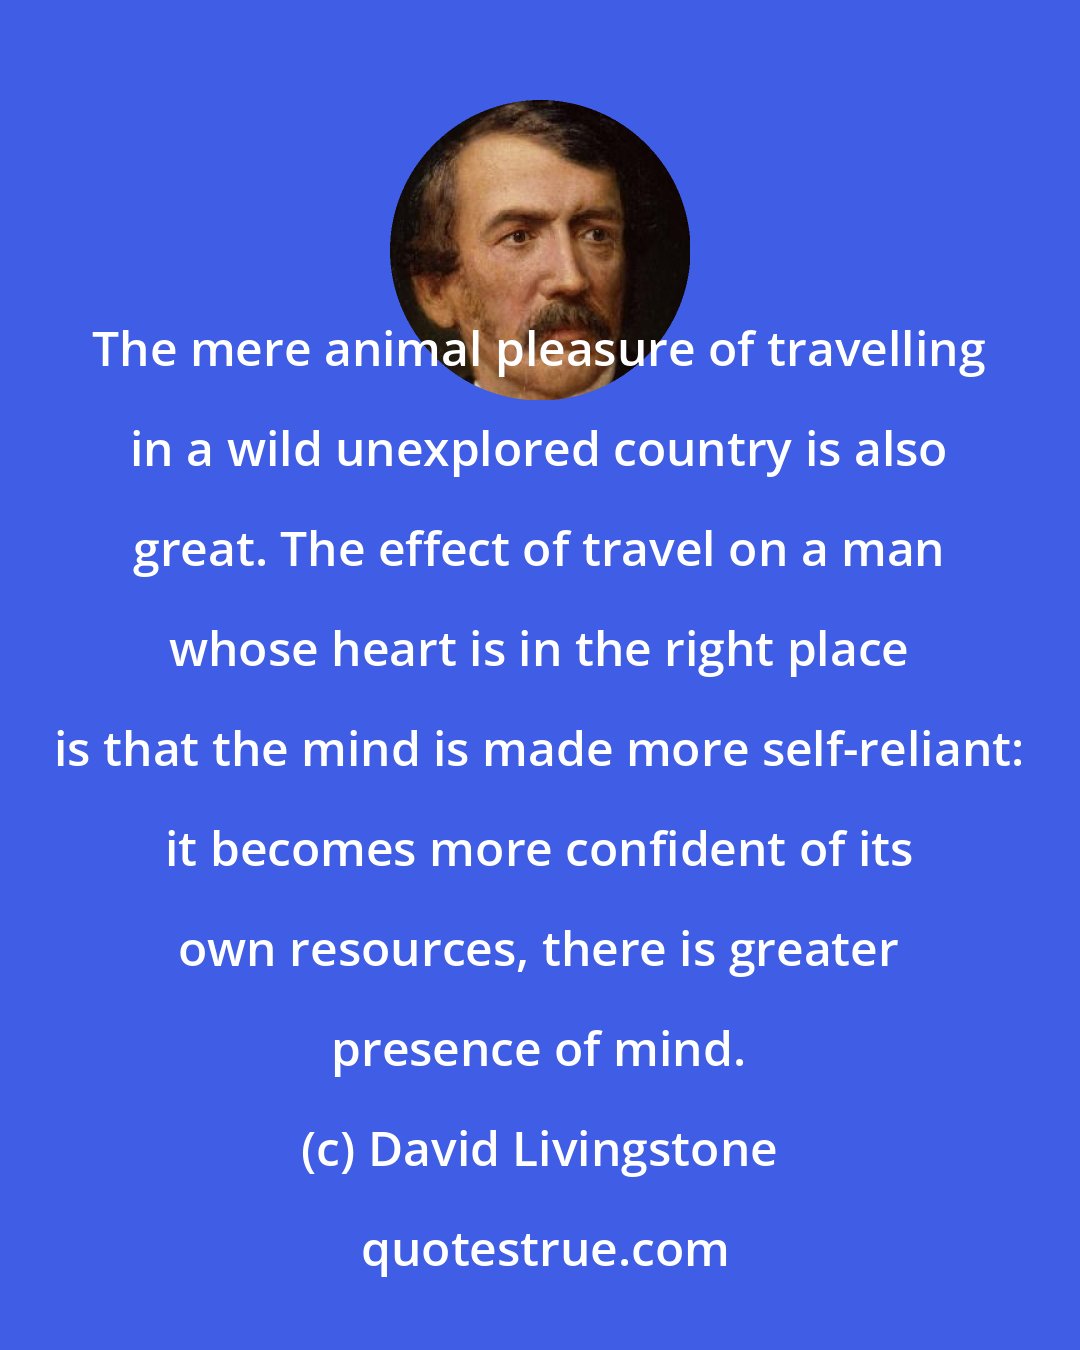 David Livingstone: The mere animal pleasure of travelling in a wild unexplored country is also great. The effect of travel on a man whose heart is in the right place is that the mind is made more self-reliant: it becomes more confident of its own resources, there is greater presence of mind.